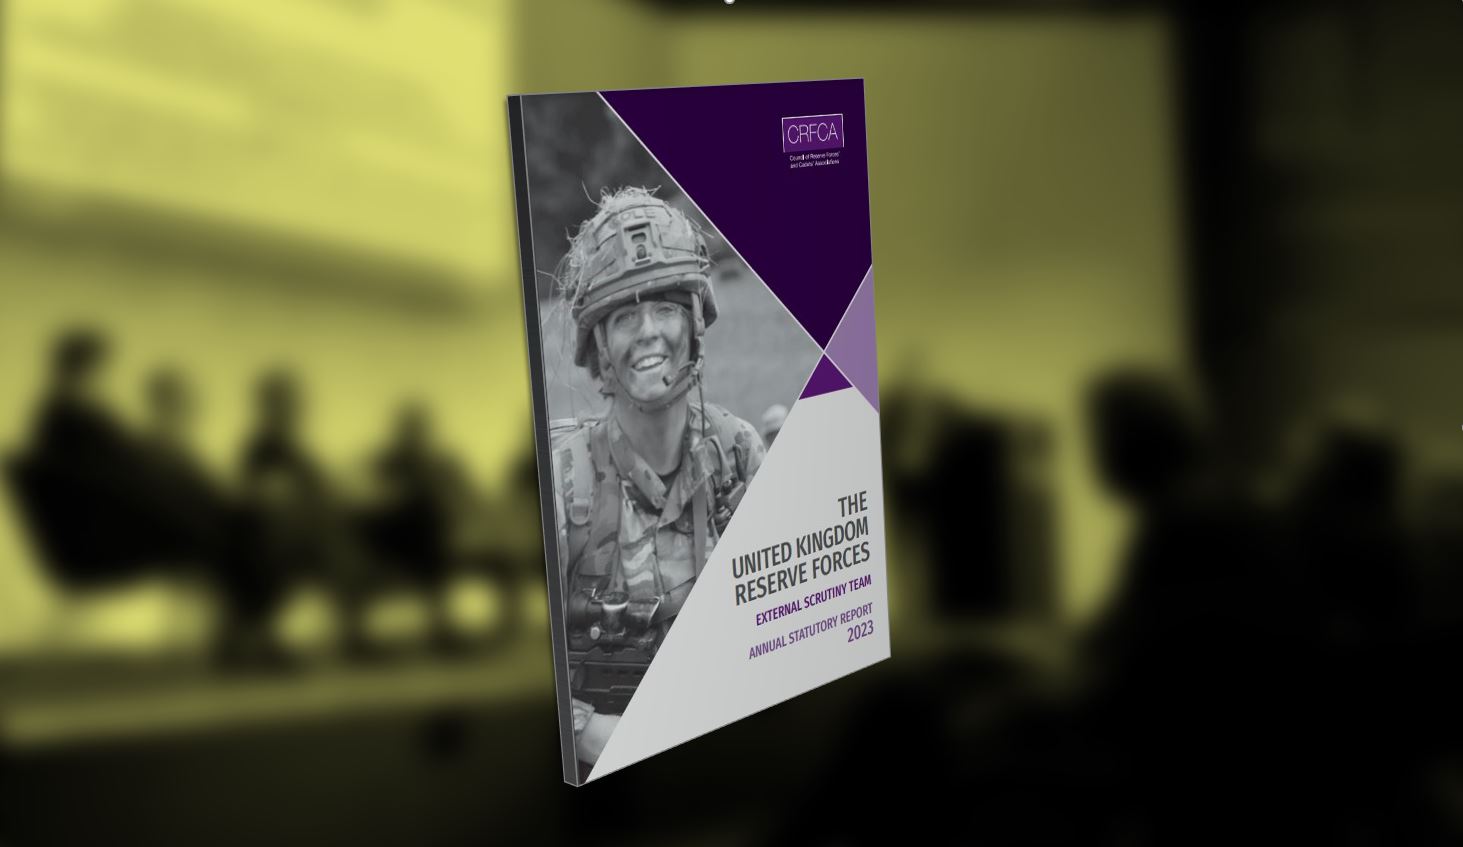 RFCA 2023 External Scrutiny Team reports that the condition of the Reserve Forces is poor and declining.